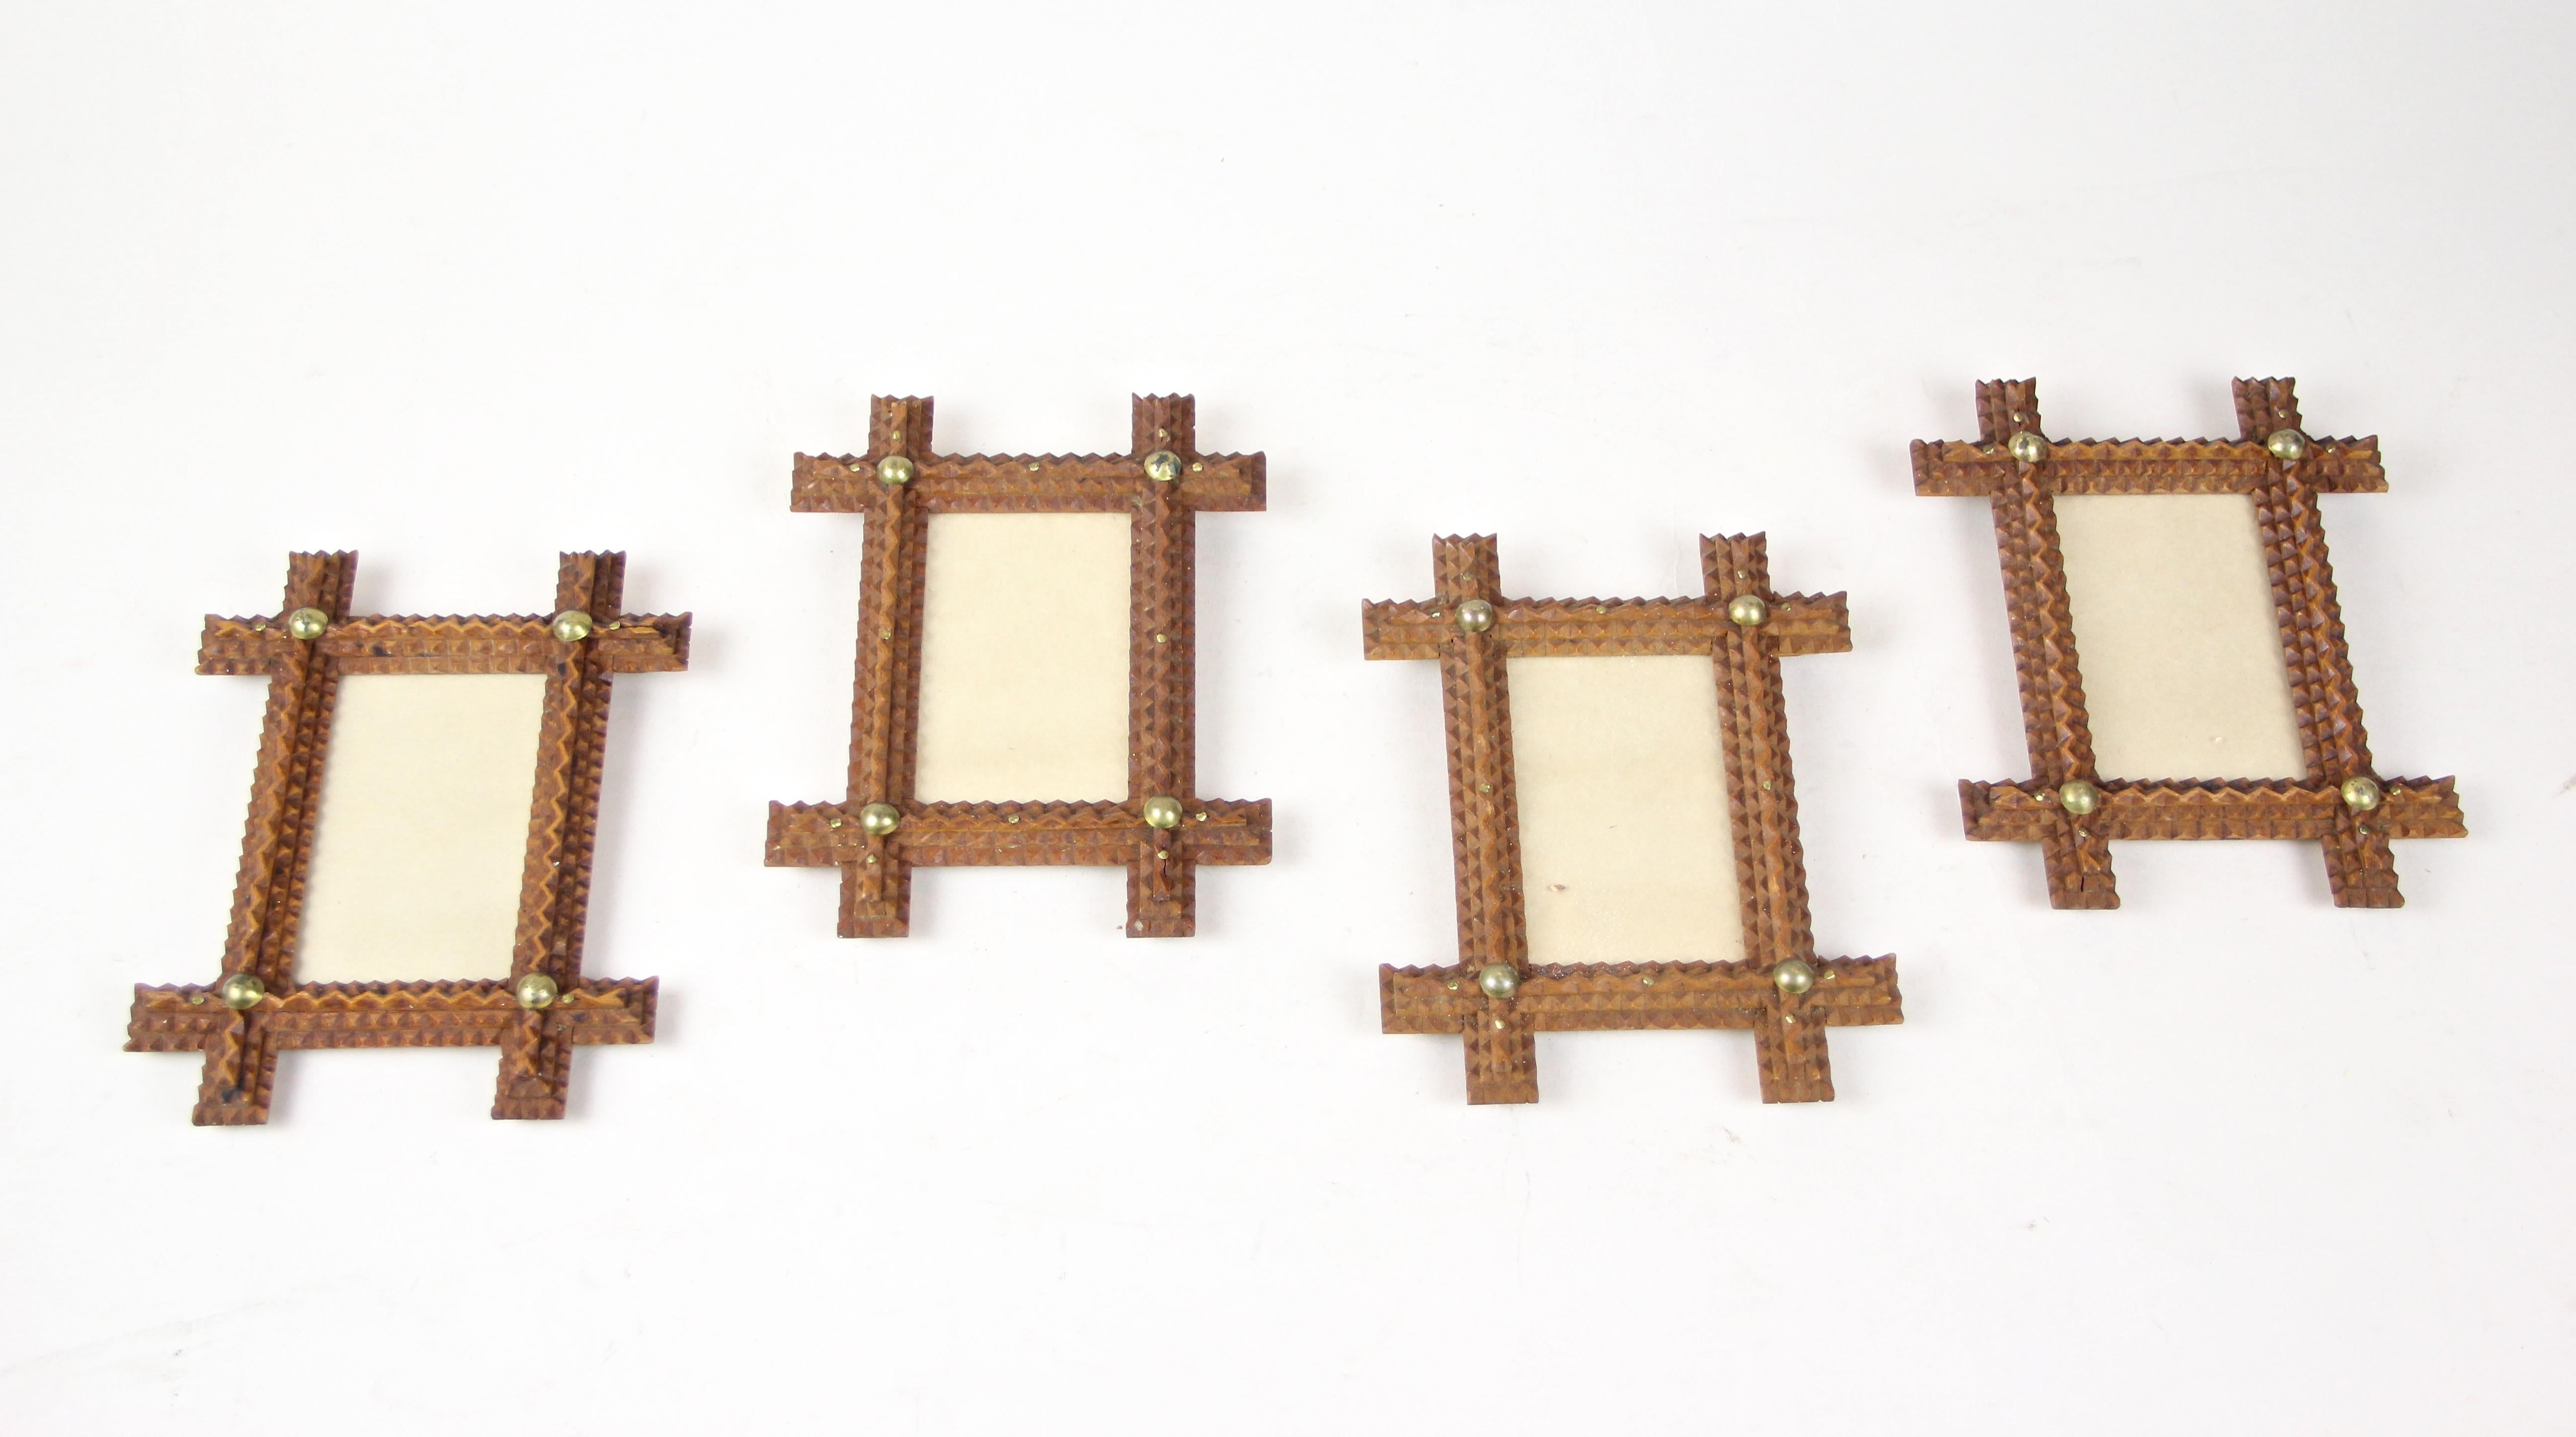 Lovely set of four small tramp art photo frames from circa 1890. Hand carved out of fine basswood, this beautiful Austrian frame set builds the perfect place for your unforgettable memories. The light brown frames show beautiful chip carvings and